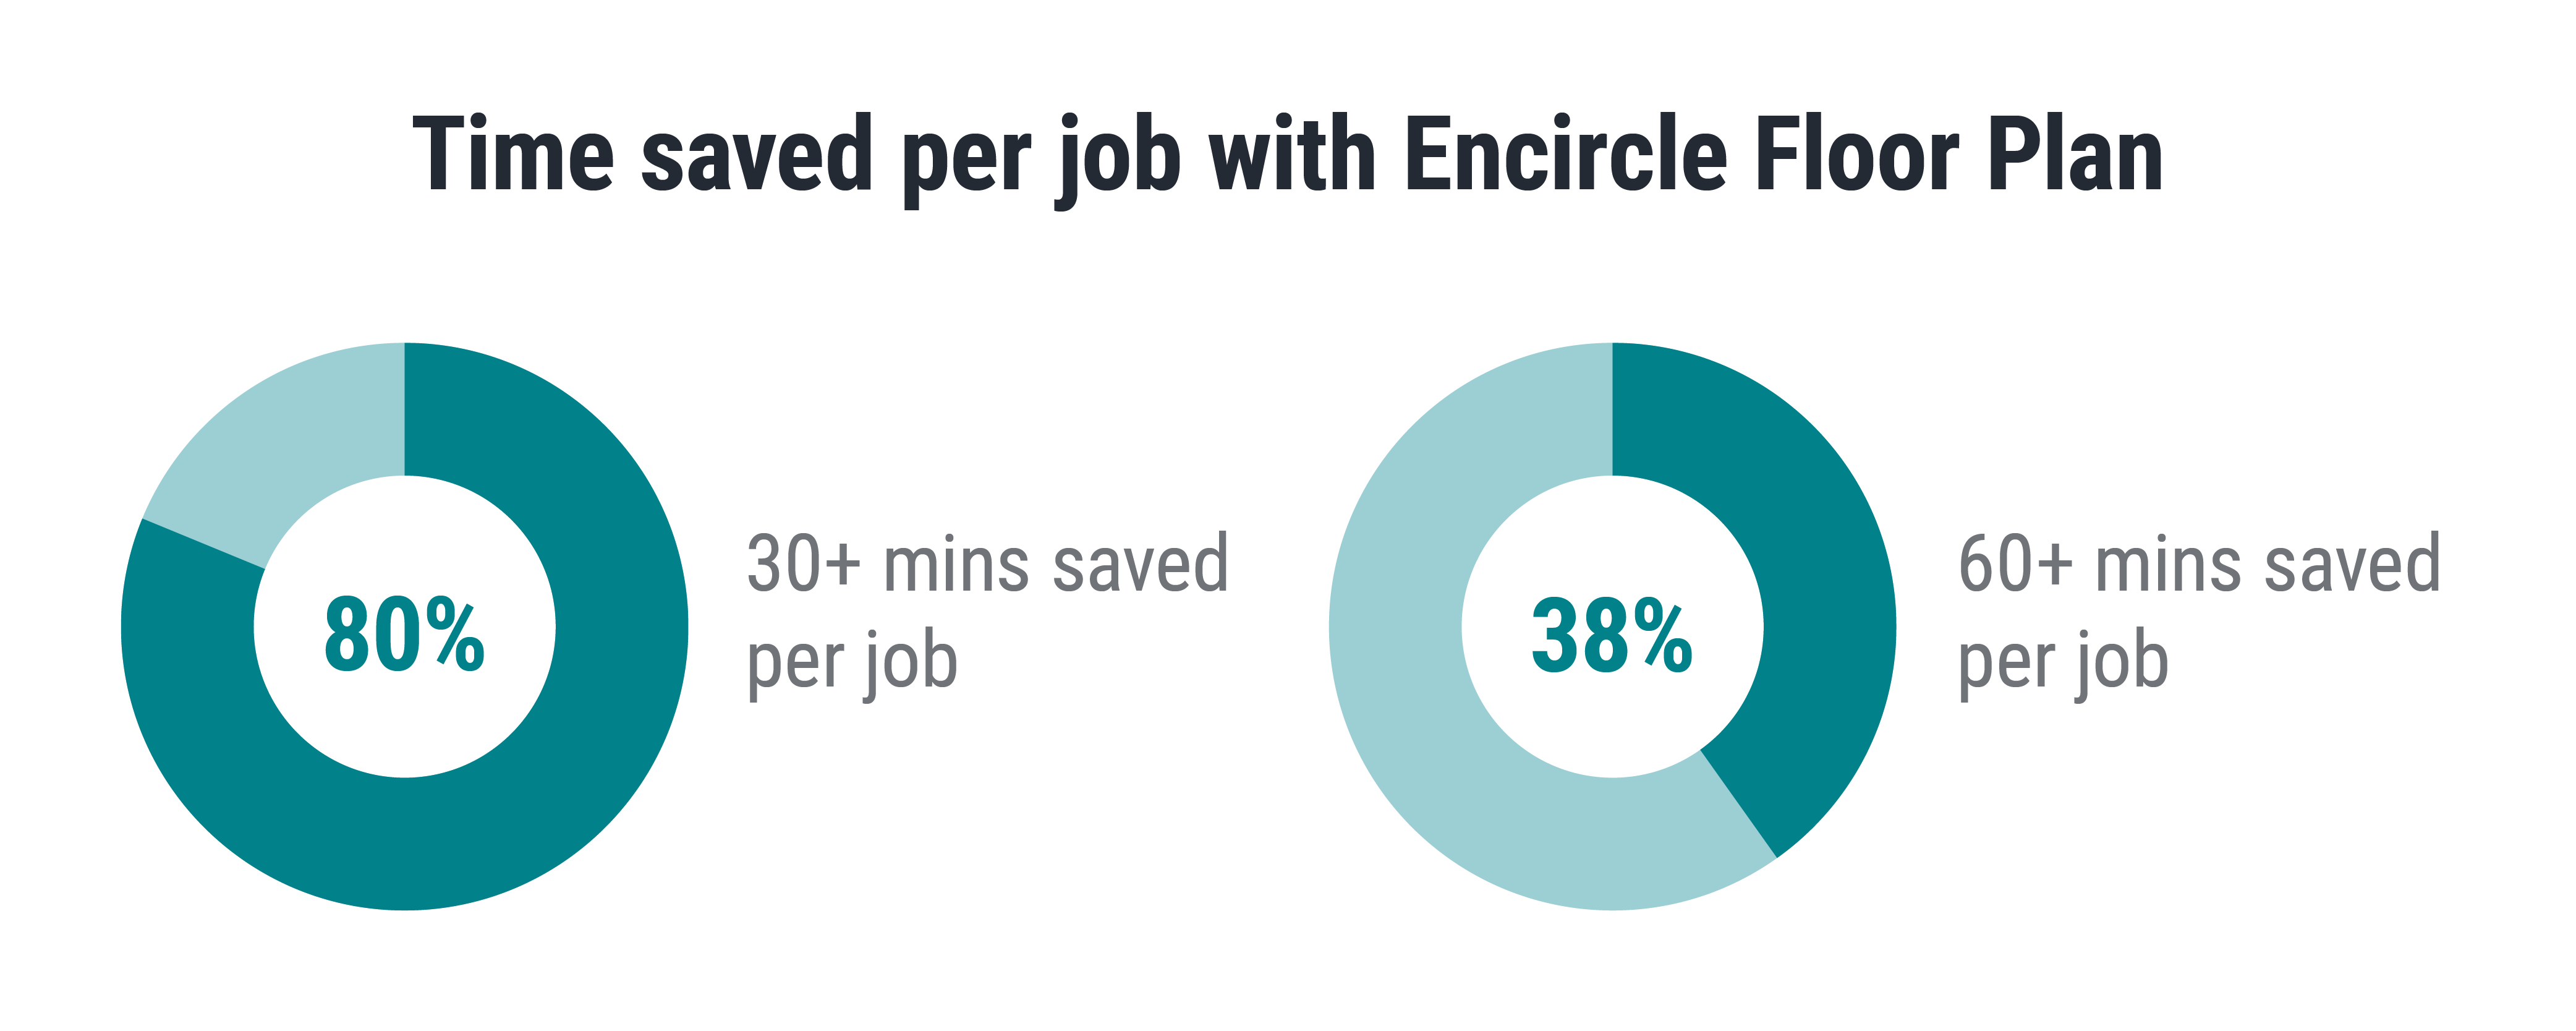 Time saved per job with Encircle Floor Plan.